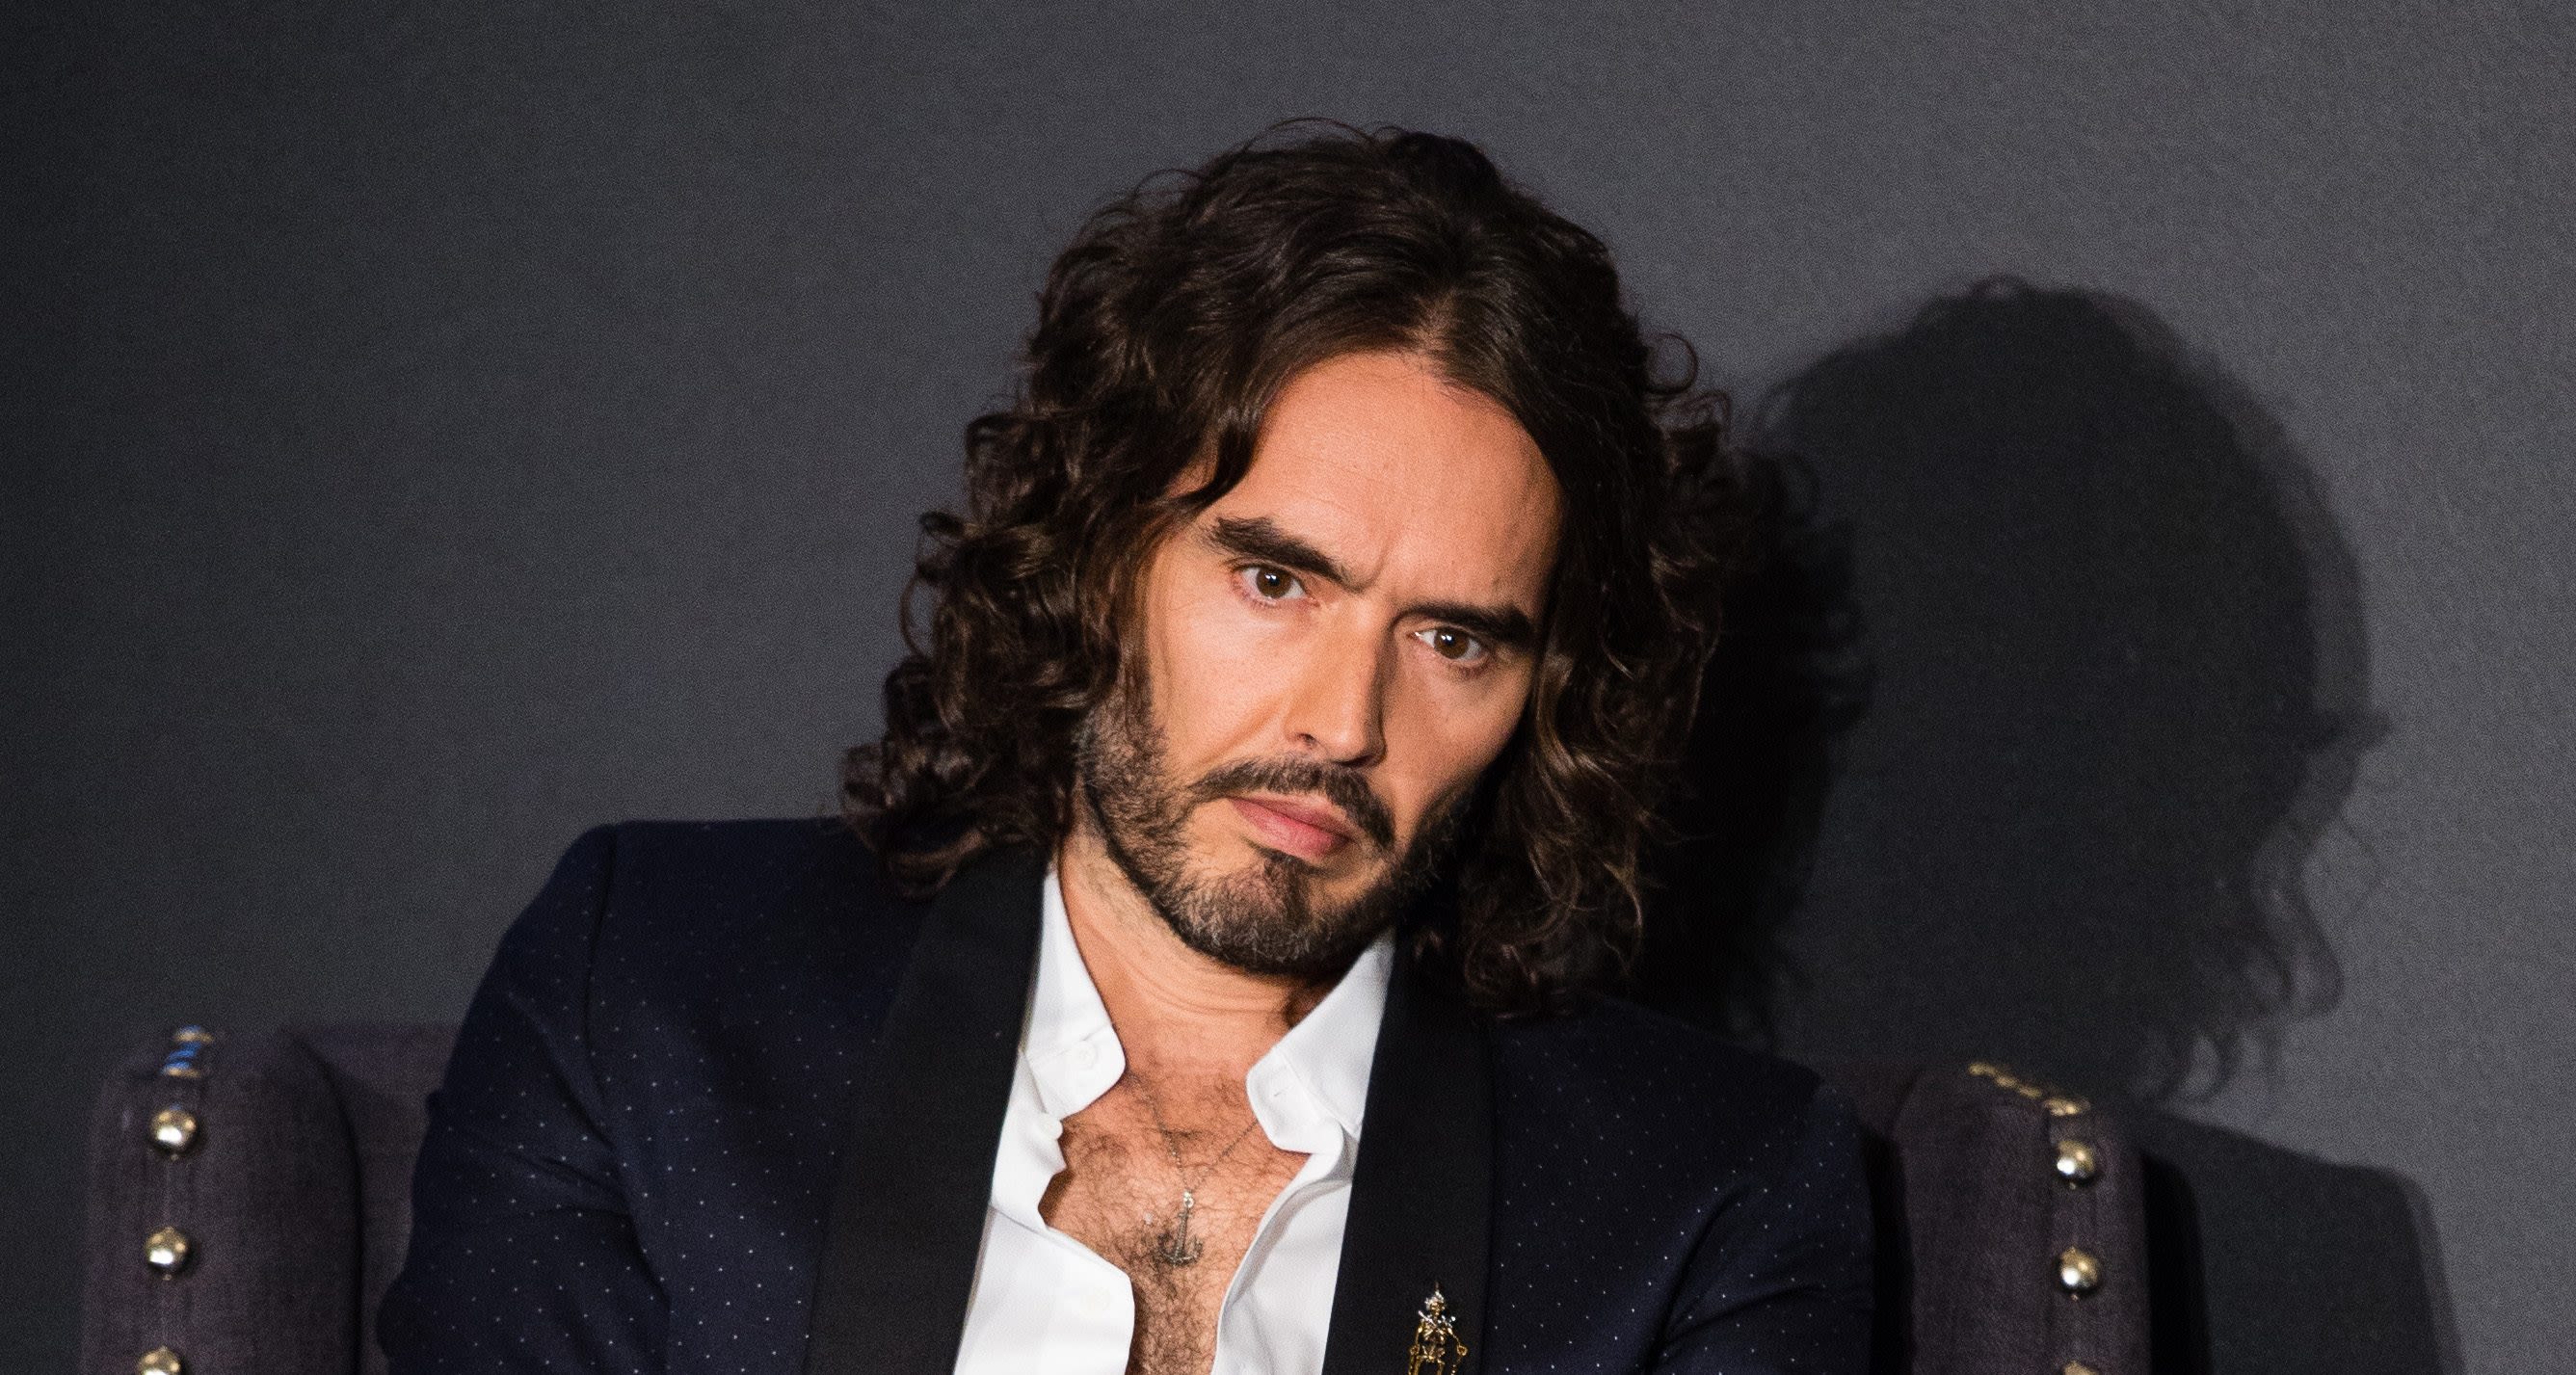 Russell Brand Revelations Have Failed To “Shift The Dial” On Harassment In Film & TV, Bectu Research Finds